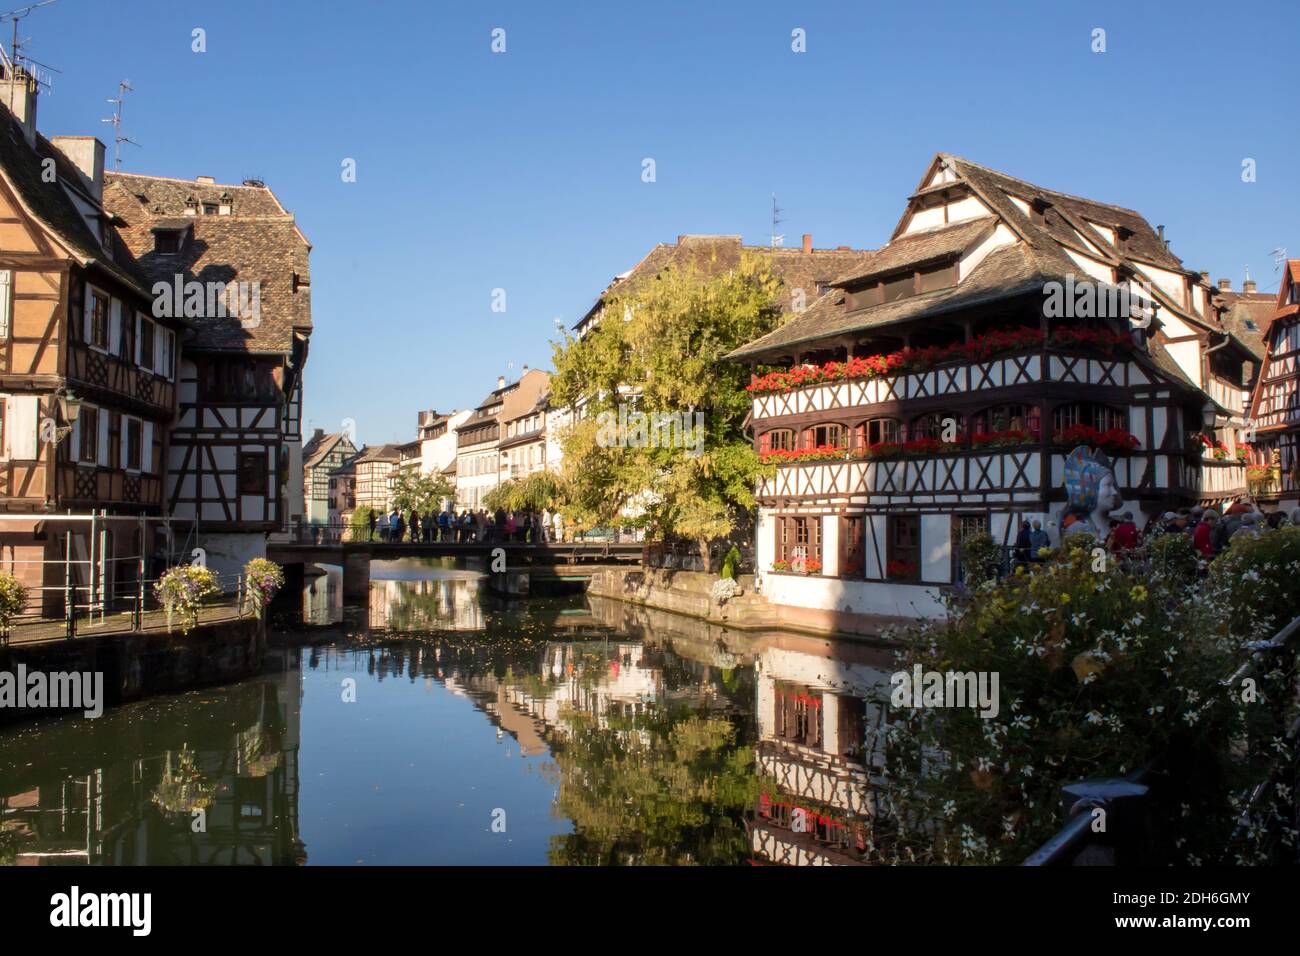 City centre of Strassbourg with half-timbered houses Stock Photo